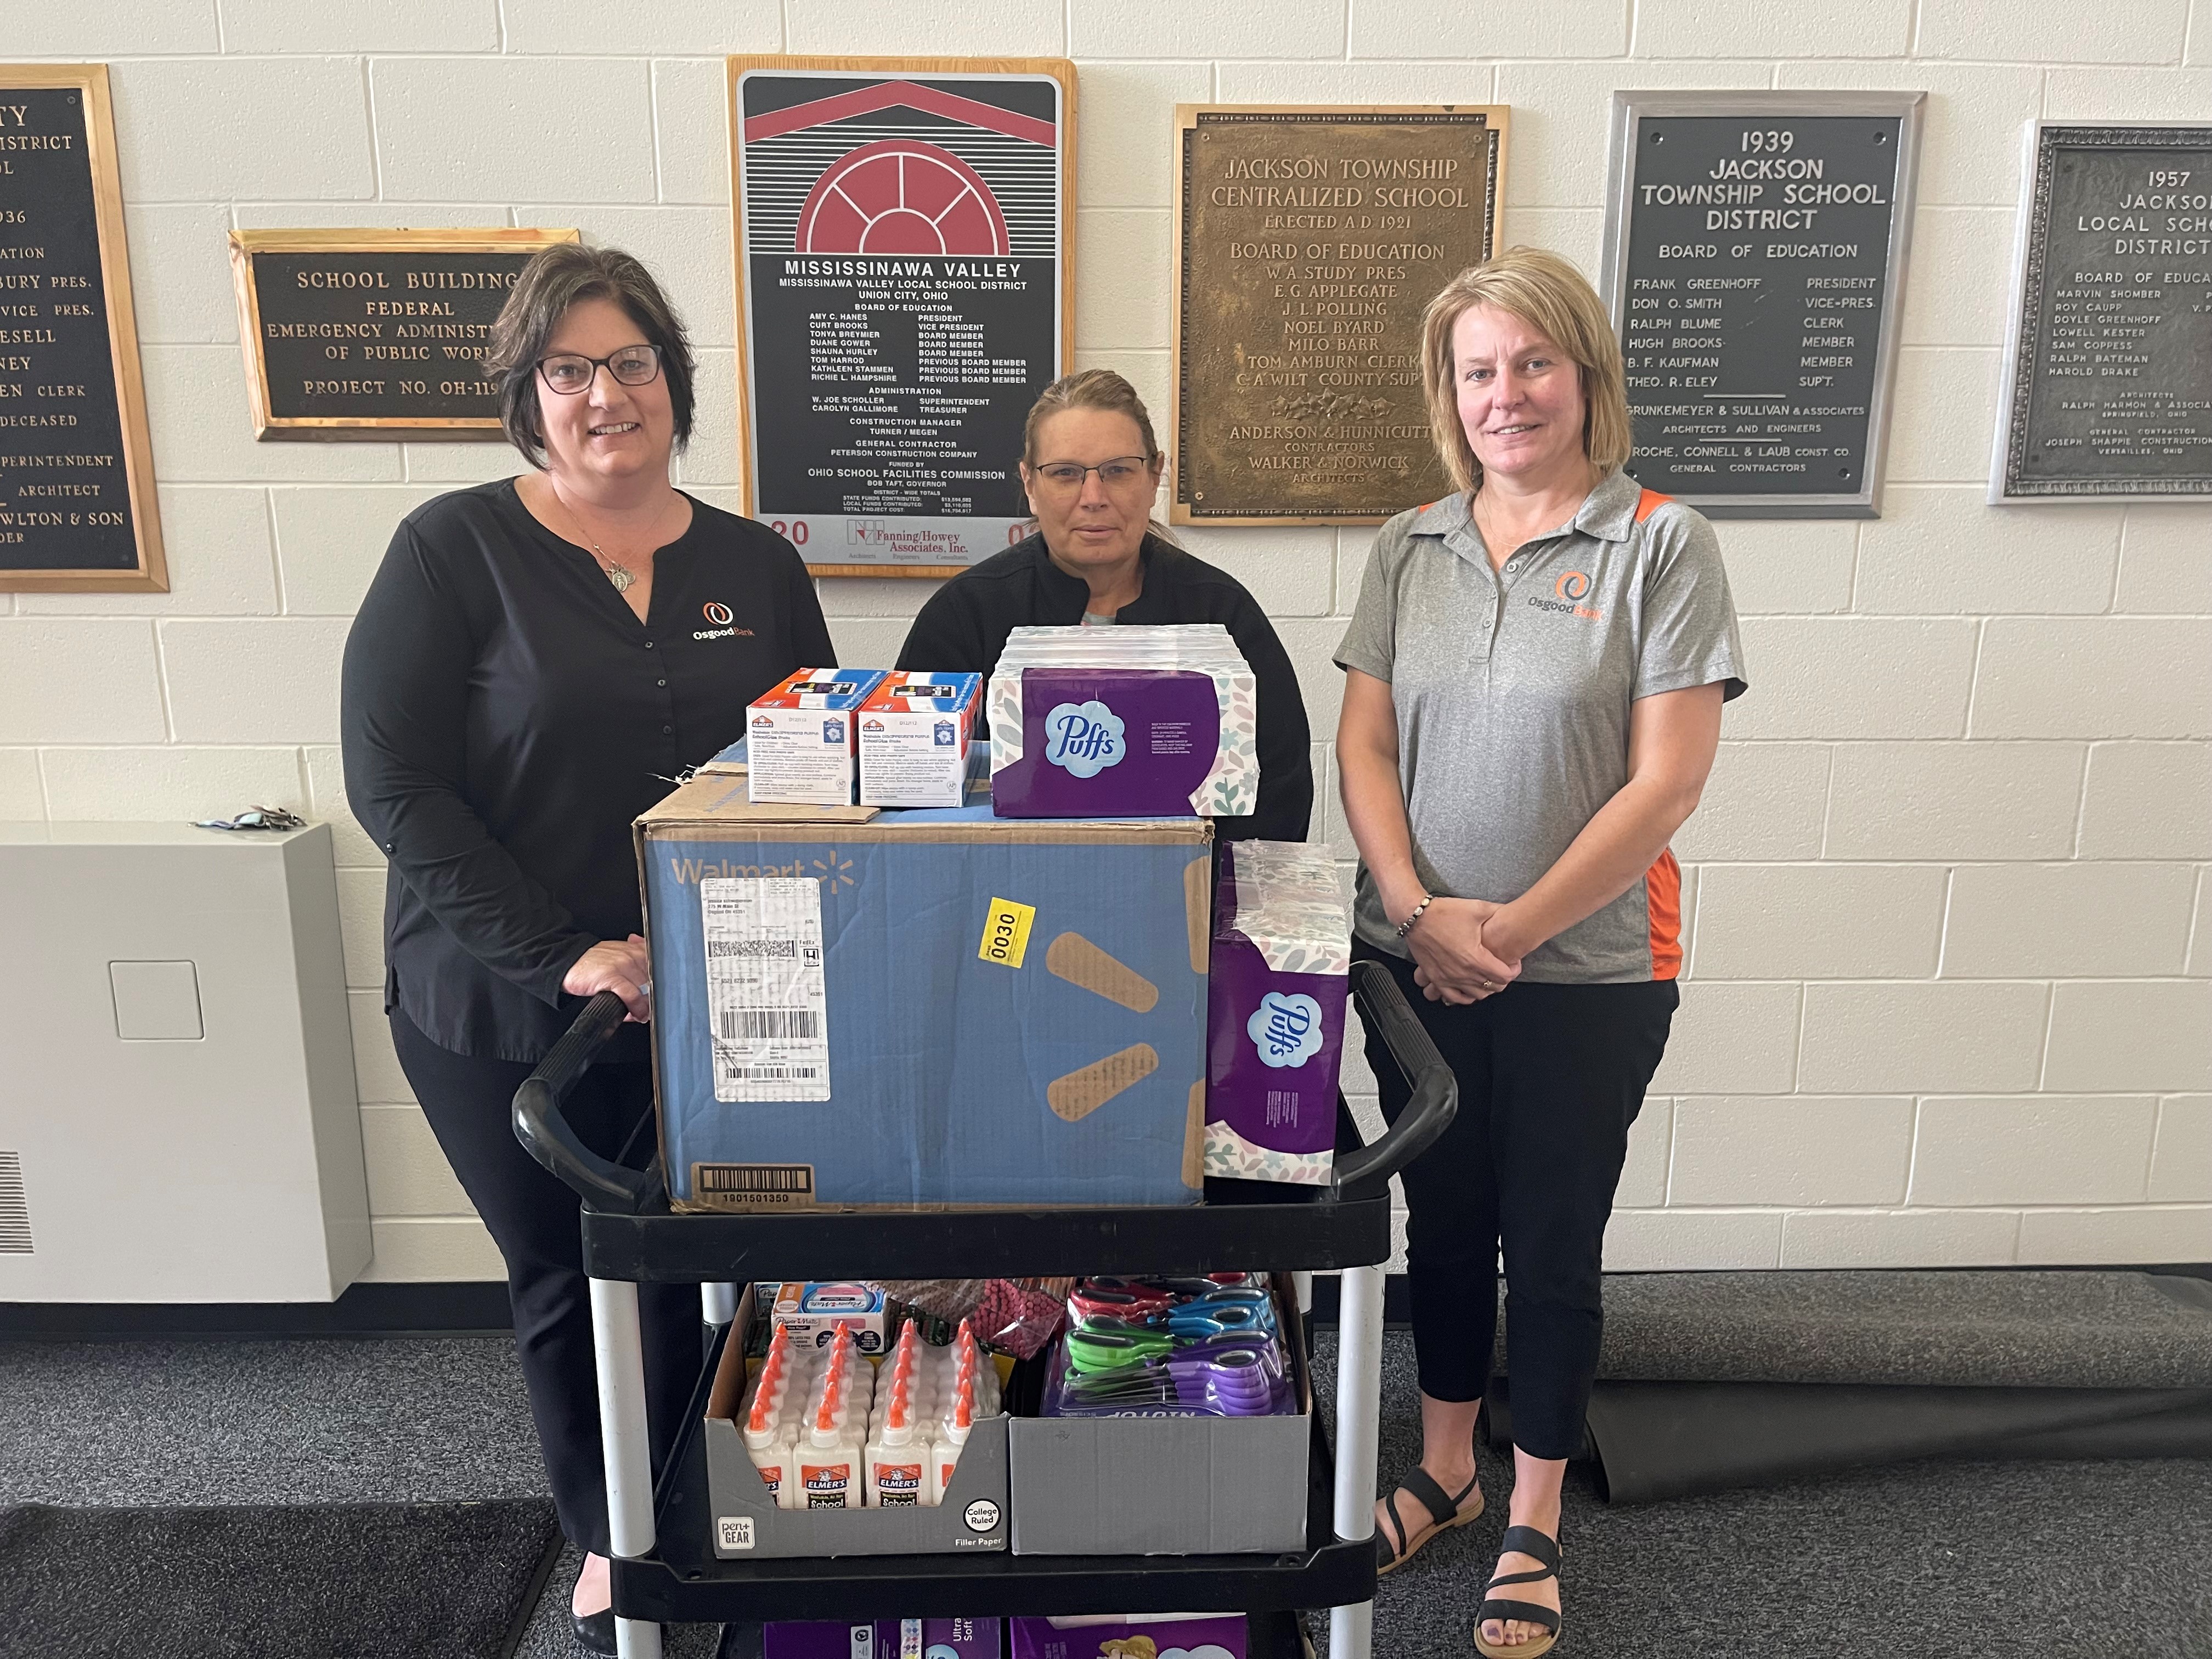 School Supply Delivery - Mississinawa Valley 2